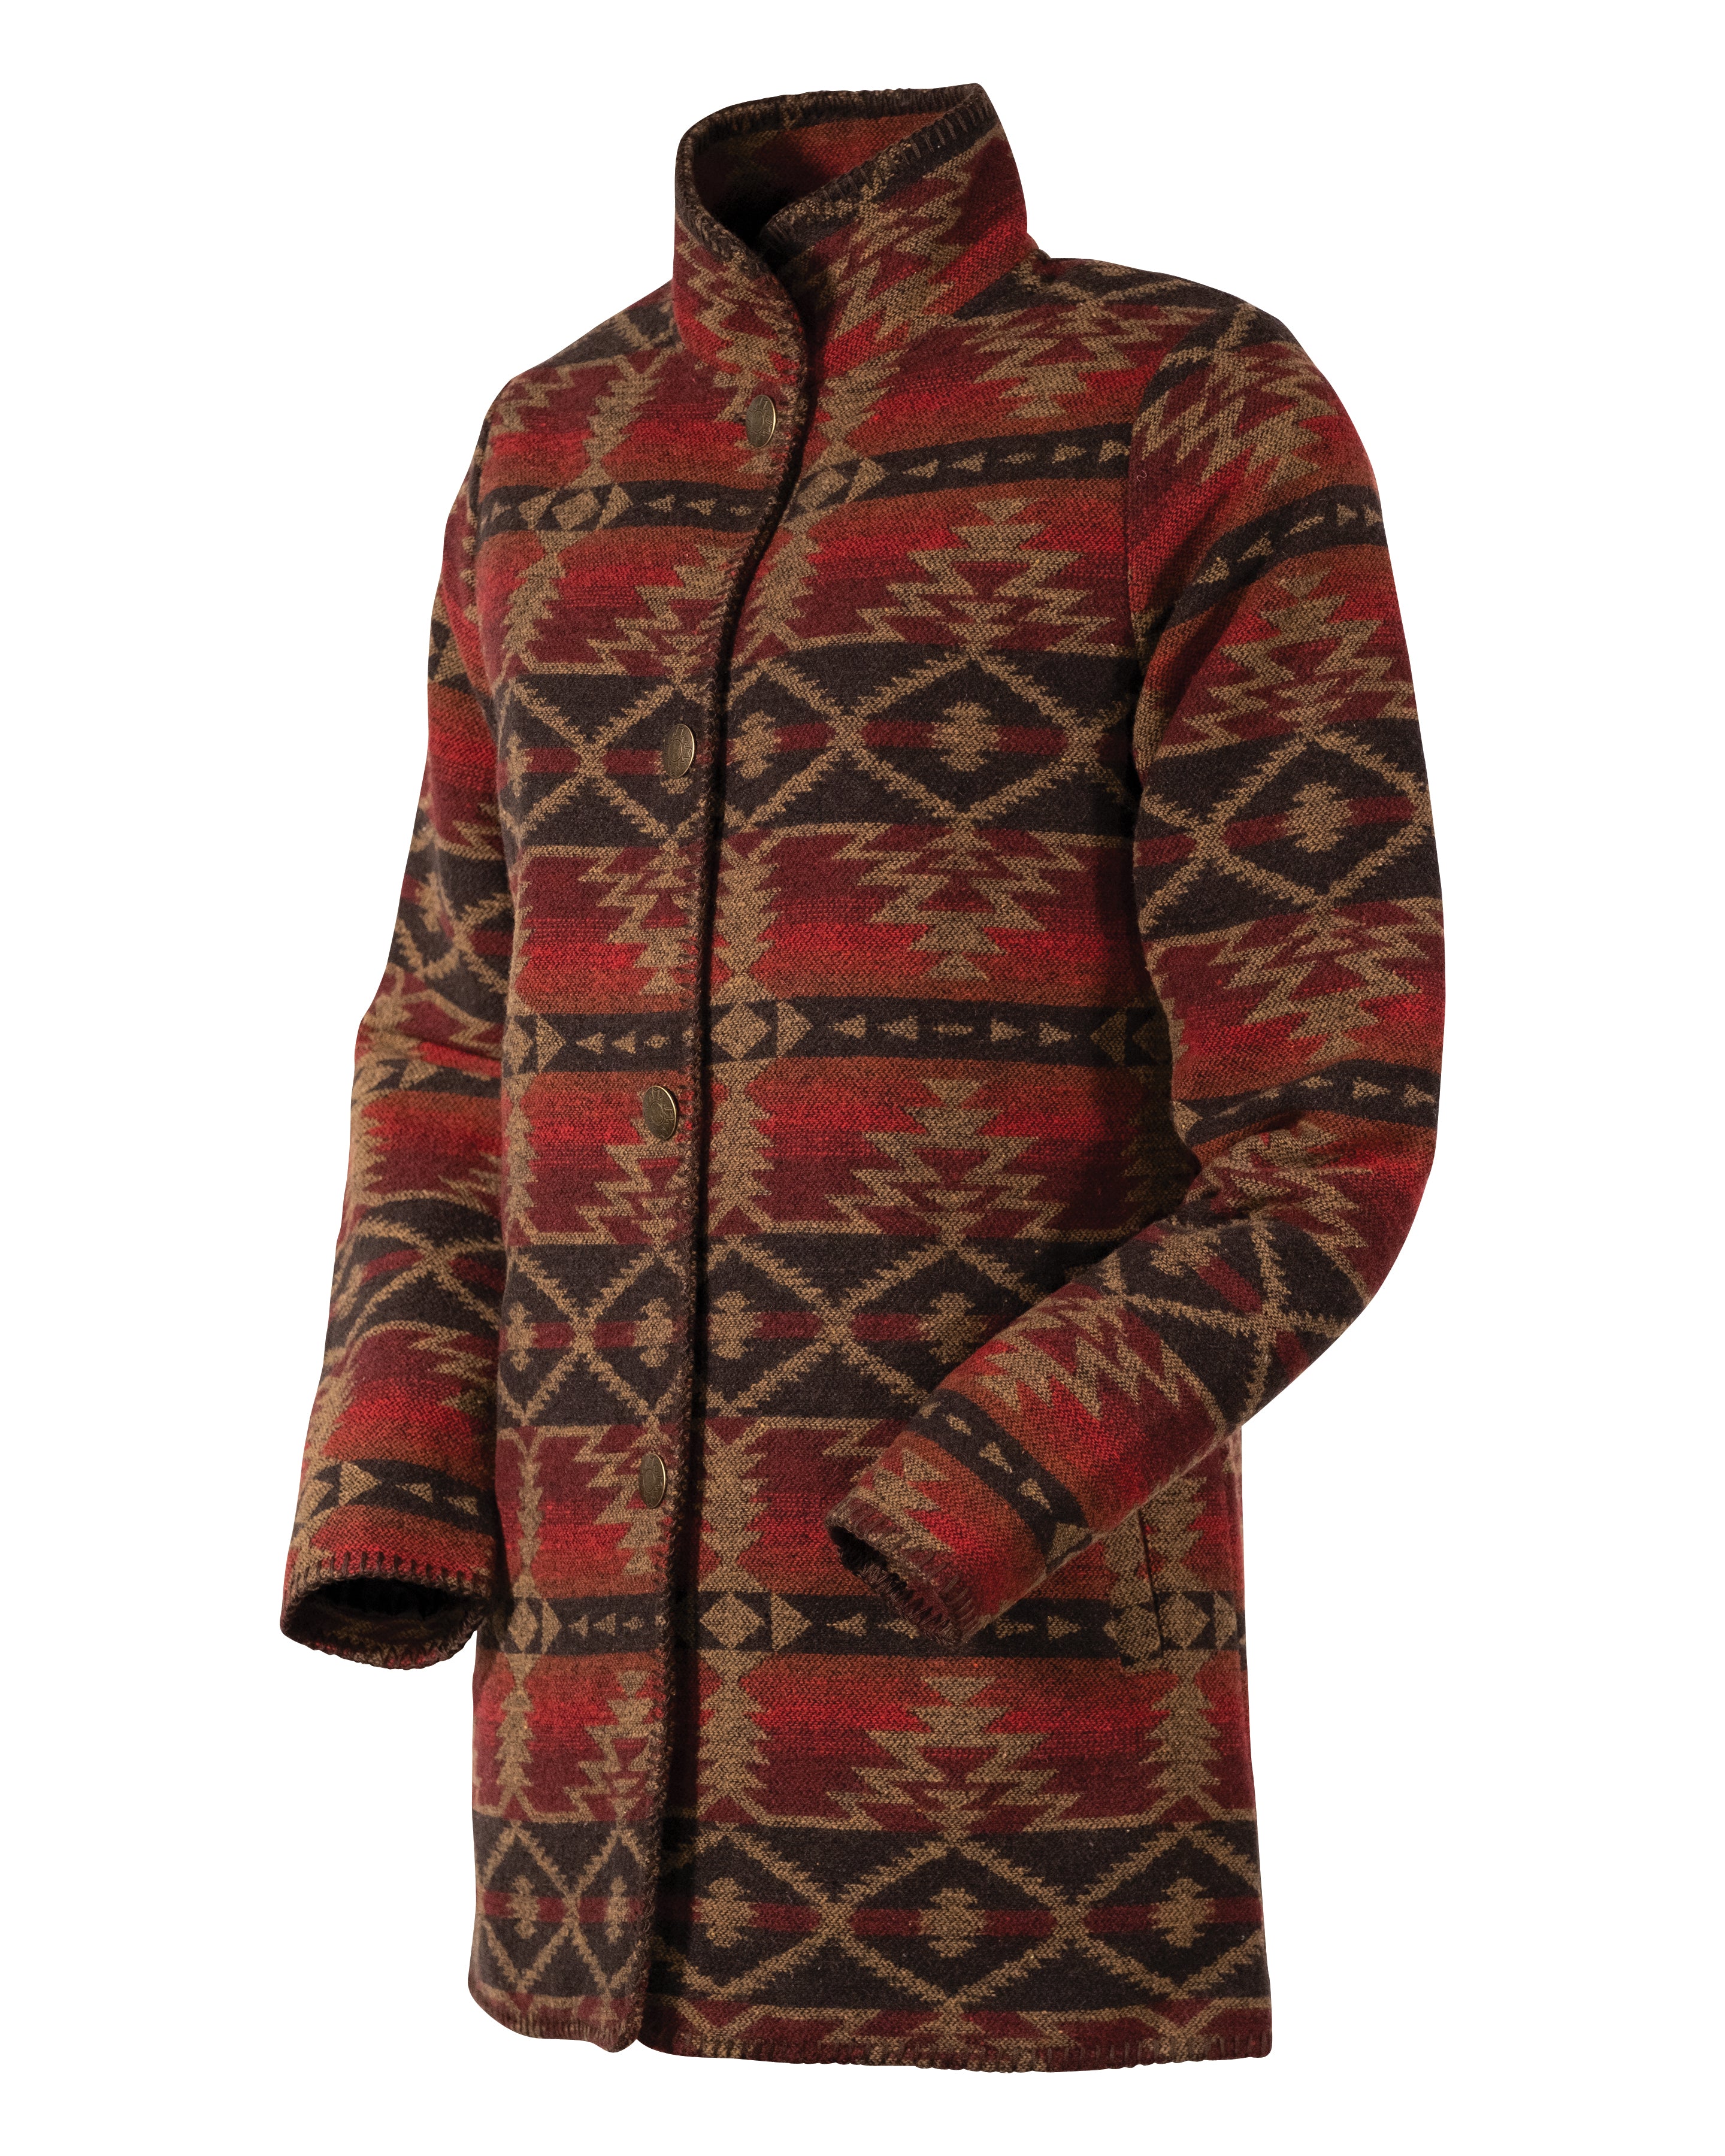 Outback Traders Moree Jacket